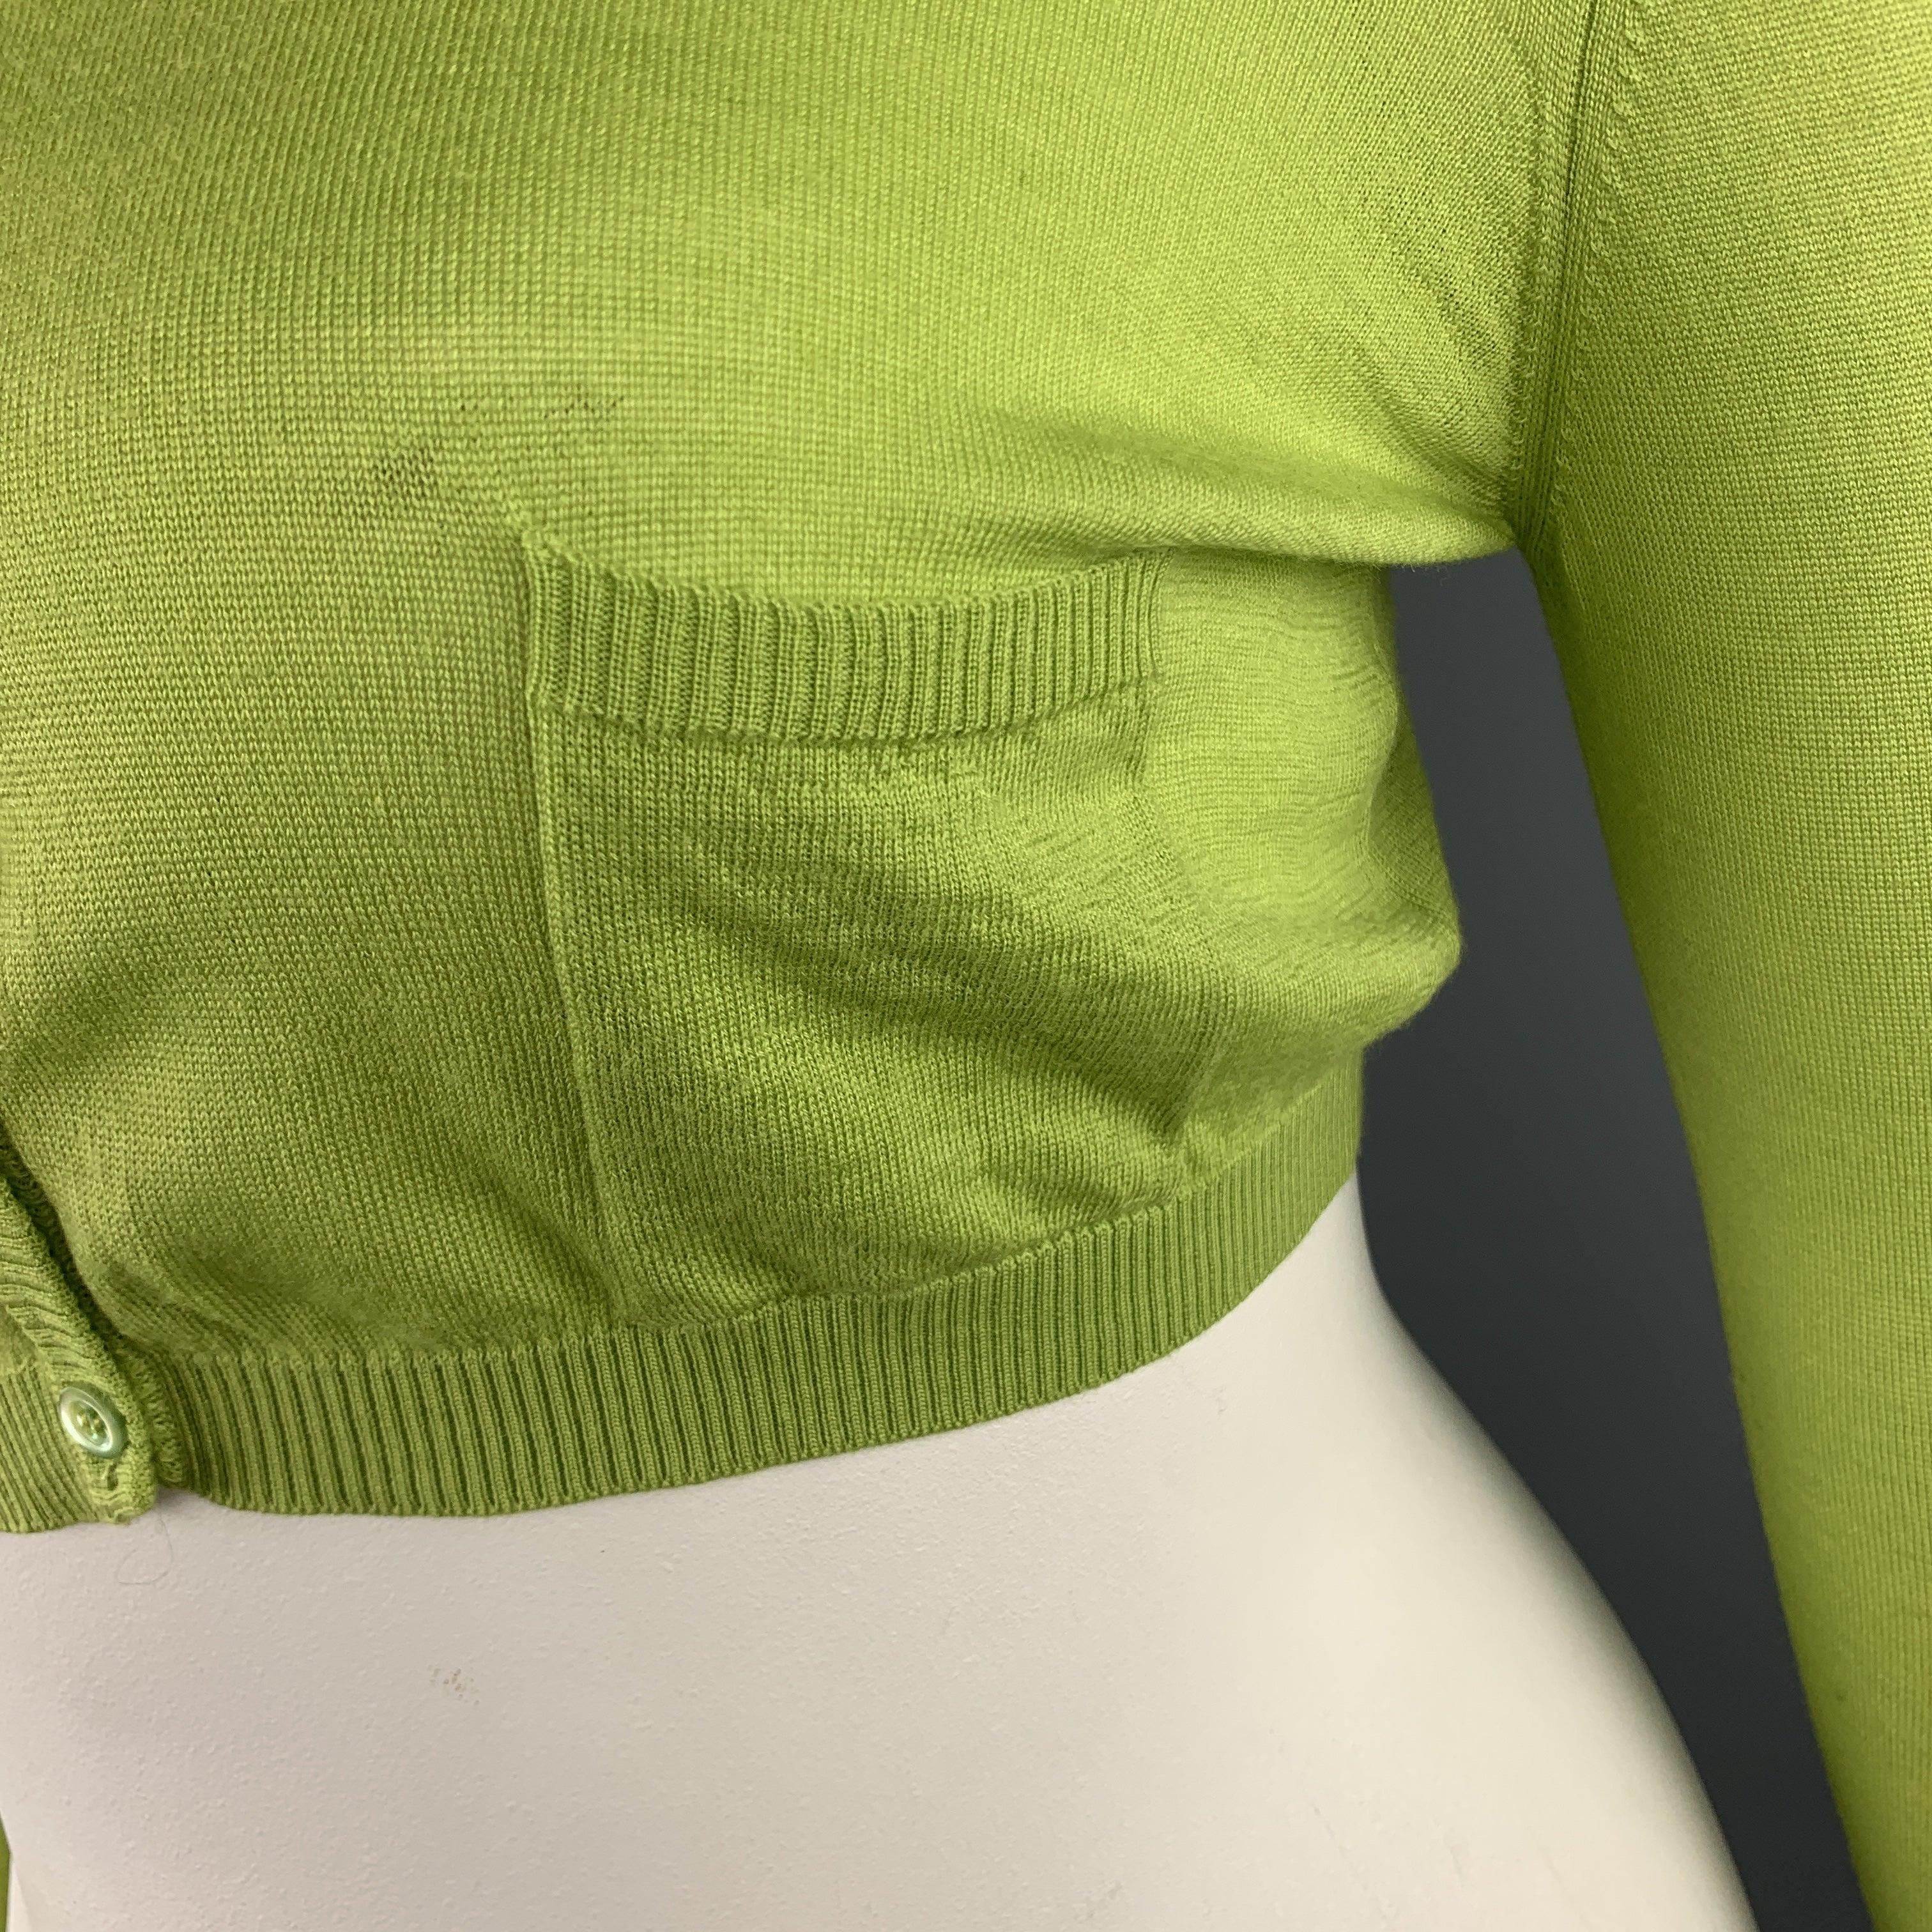 VALENTINO cardigan comes in lime green wool blend knit with a round neck, cropped hem, and patch pocket. Made in Italy.
Very Good Pre-Owned Condition. 

Marked:   L 

Measurements: 
 
Shoulder: 17 inches Bust: 36 inches Sleeve: 18 inches Length: